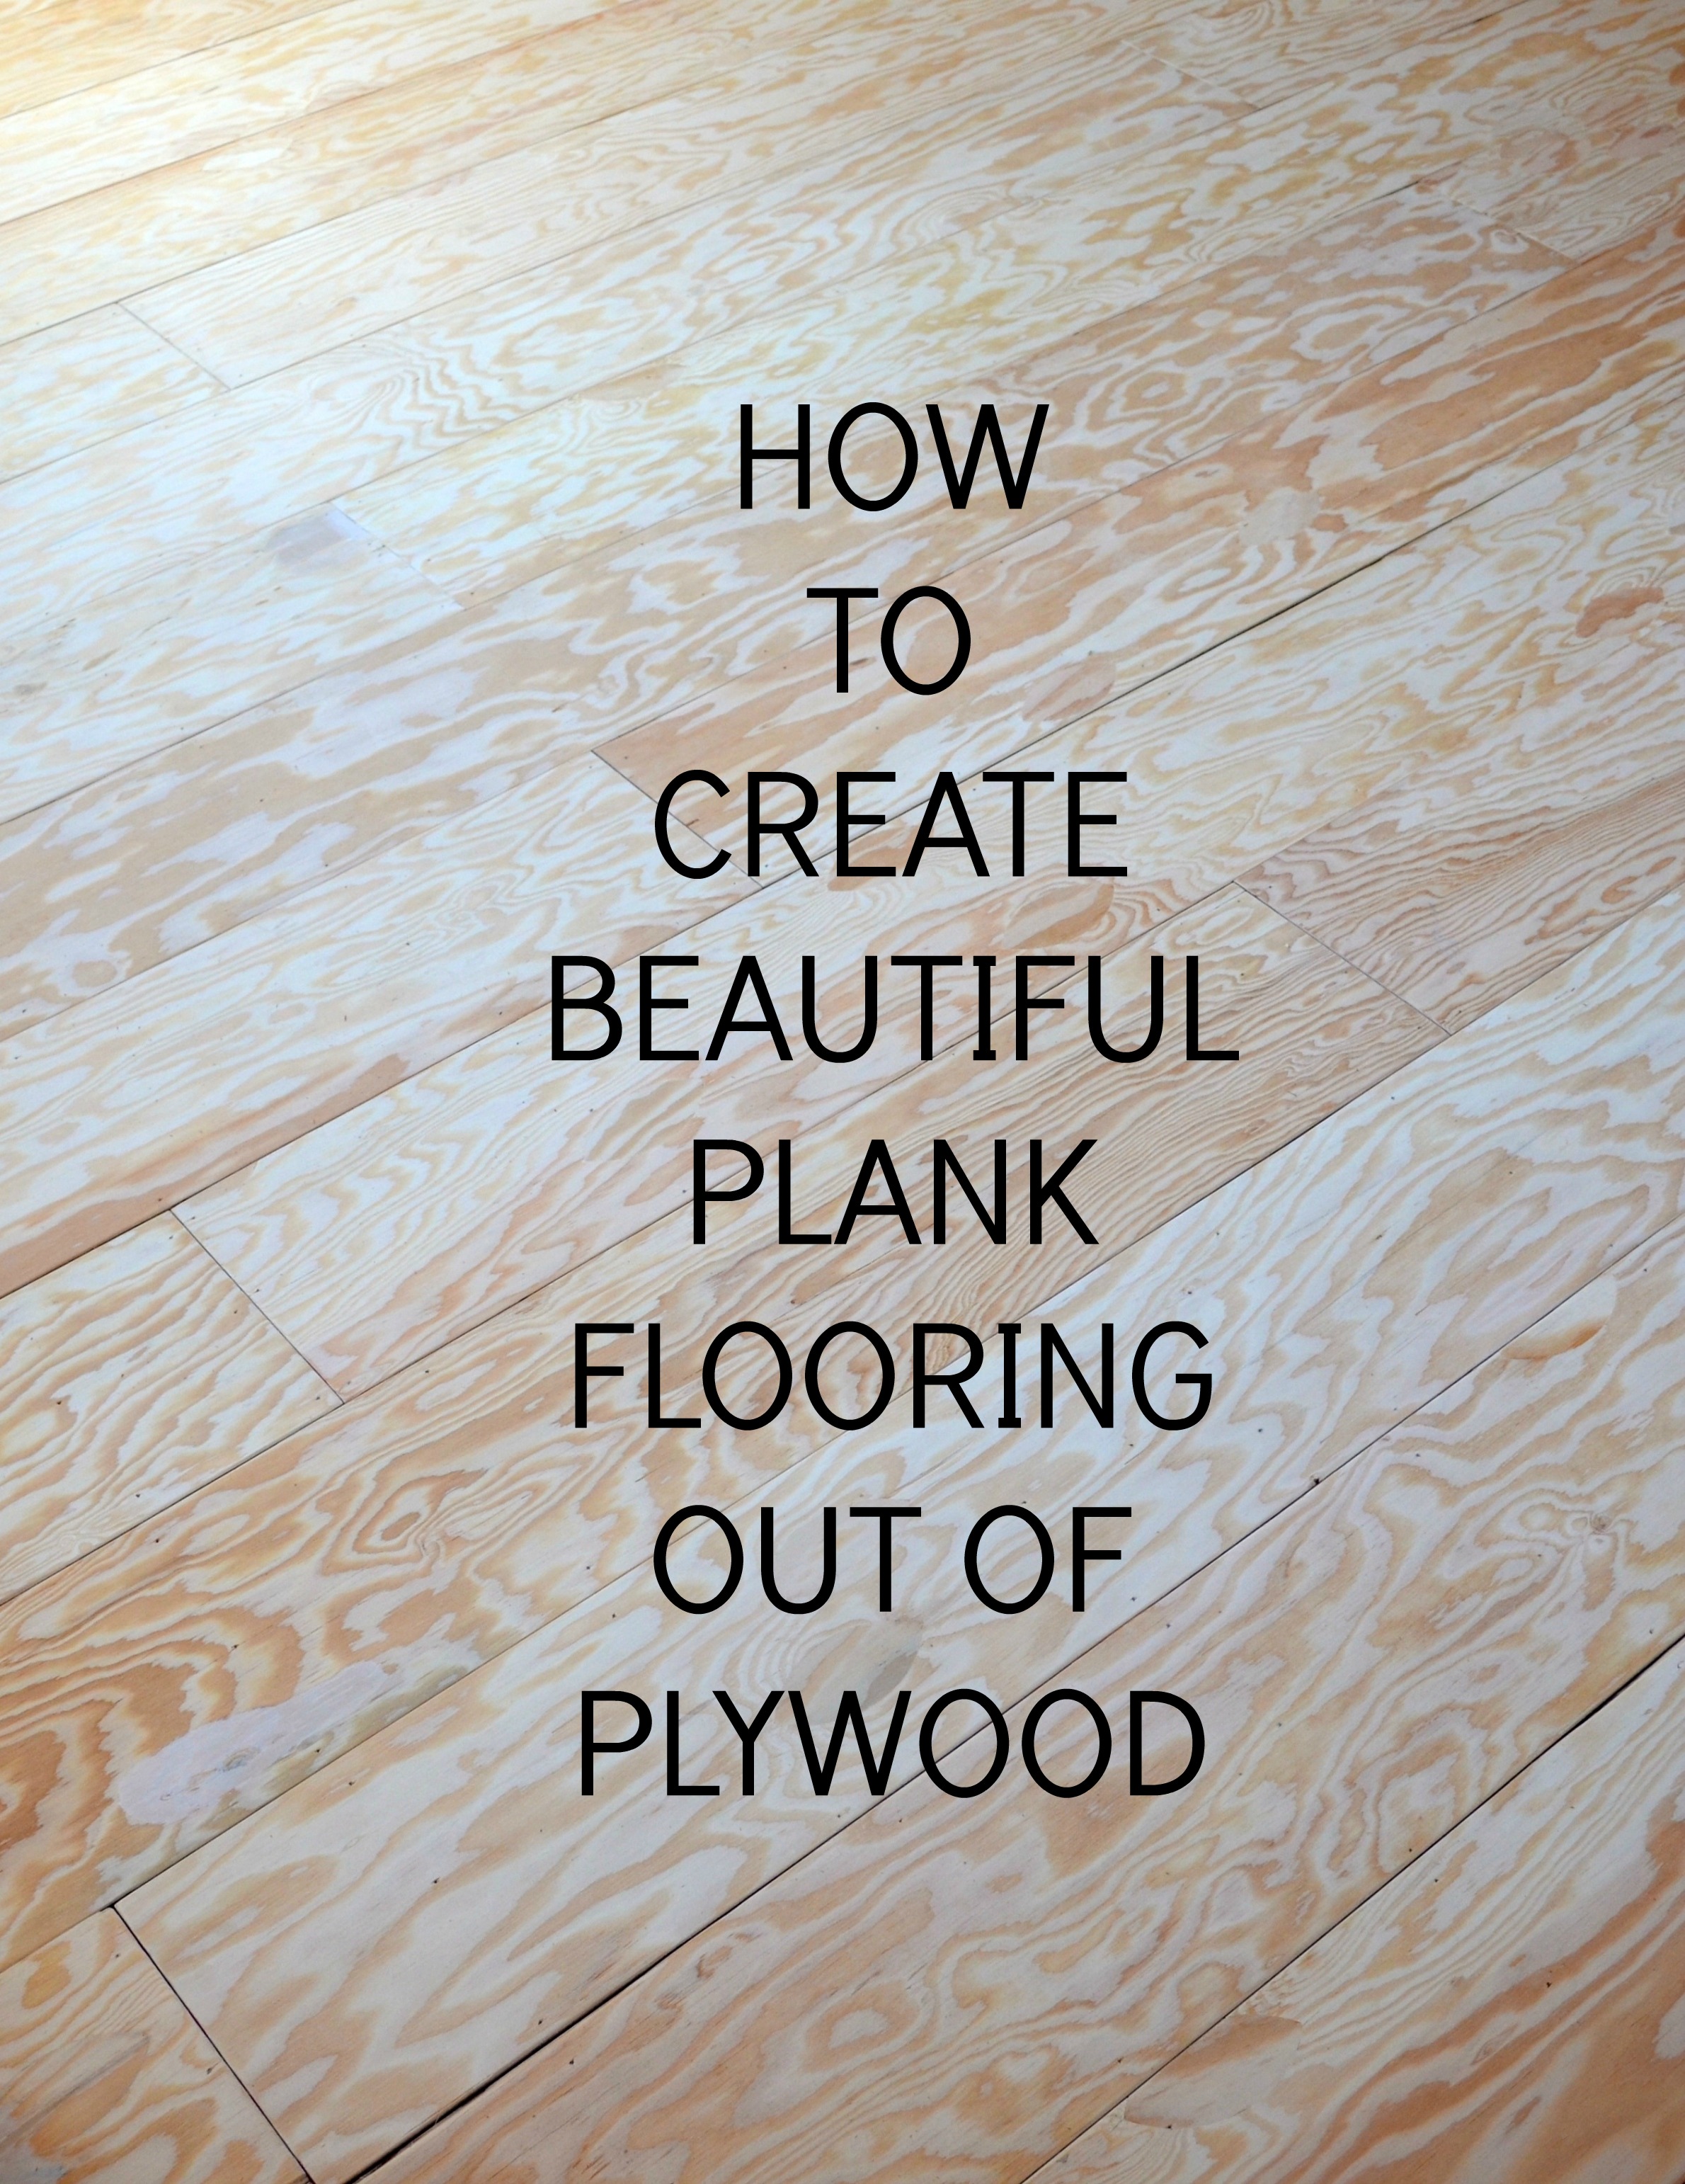 HOW TO CREATE BEAUTIFUL PLANK FLOORING OUT OF PLYWOOD - After Orange ...